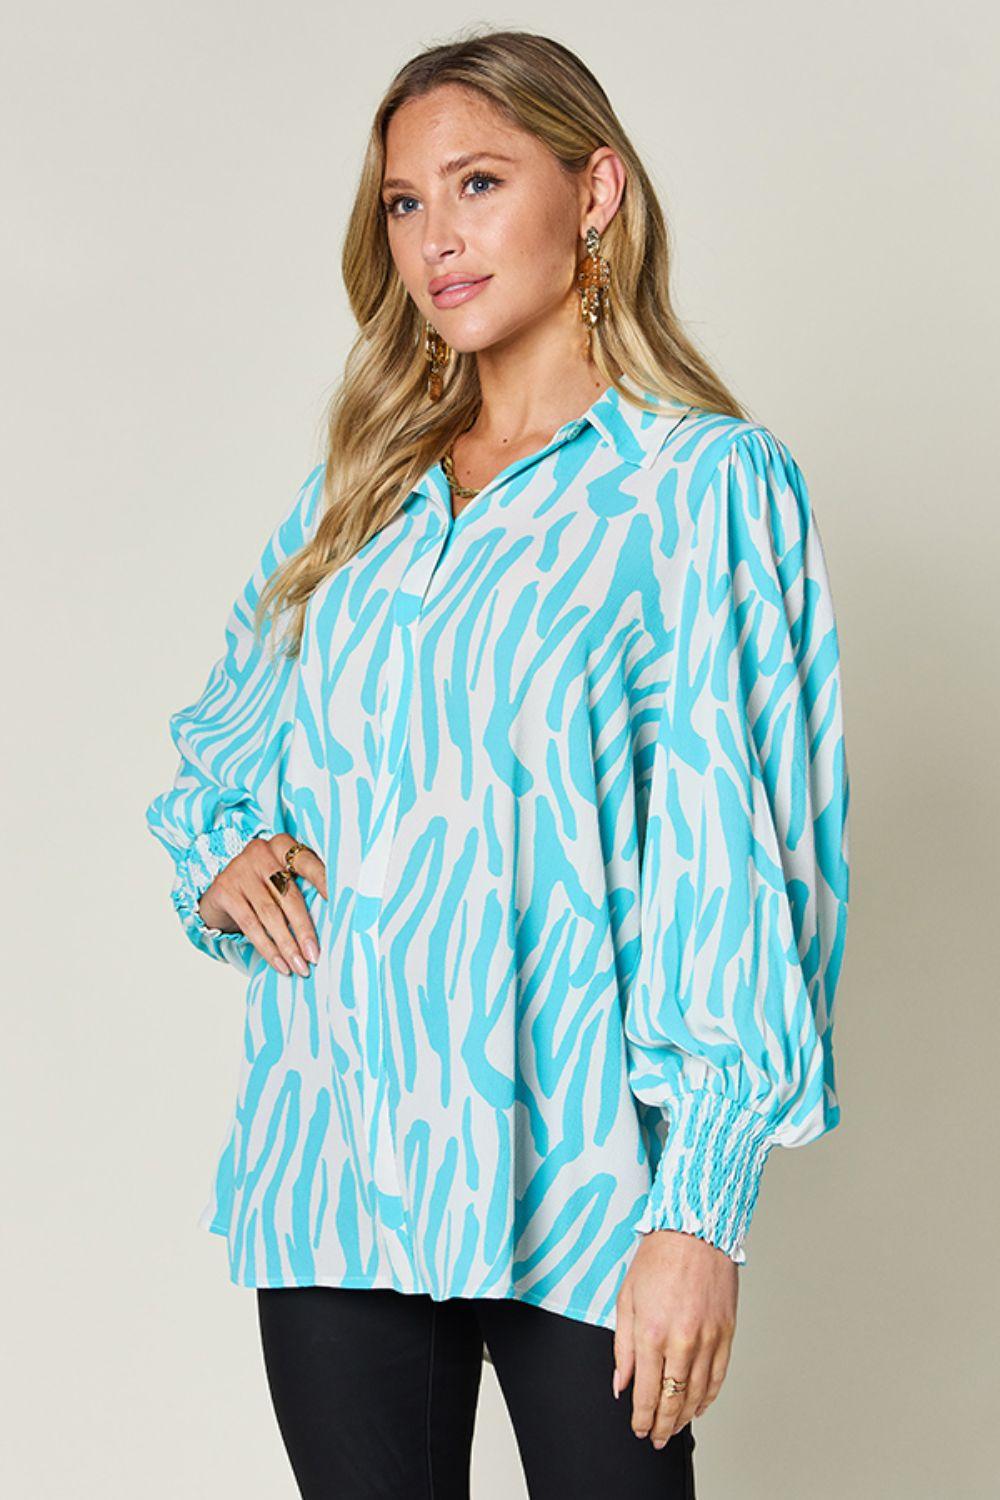 Double Take Full Size Printed Smocked Long Sleeve Blouse Shirts & Tops